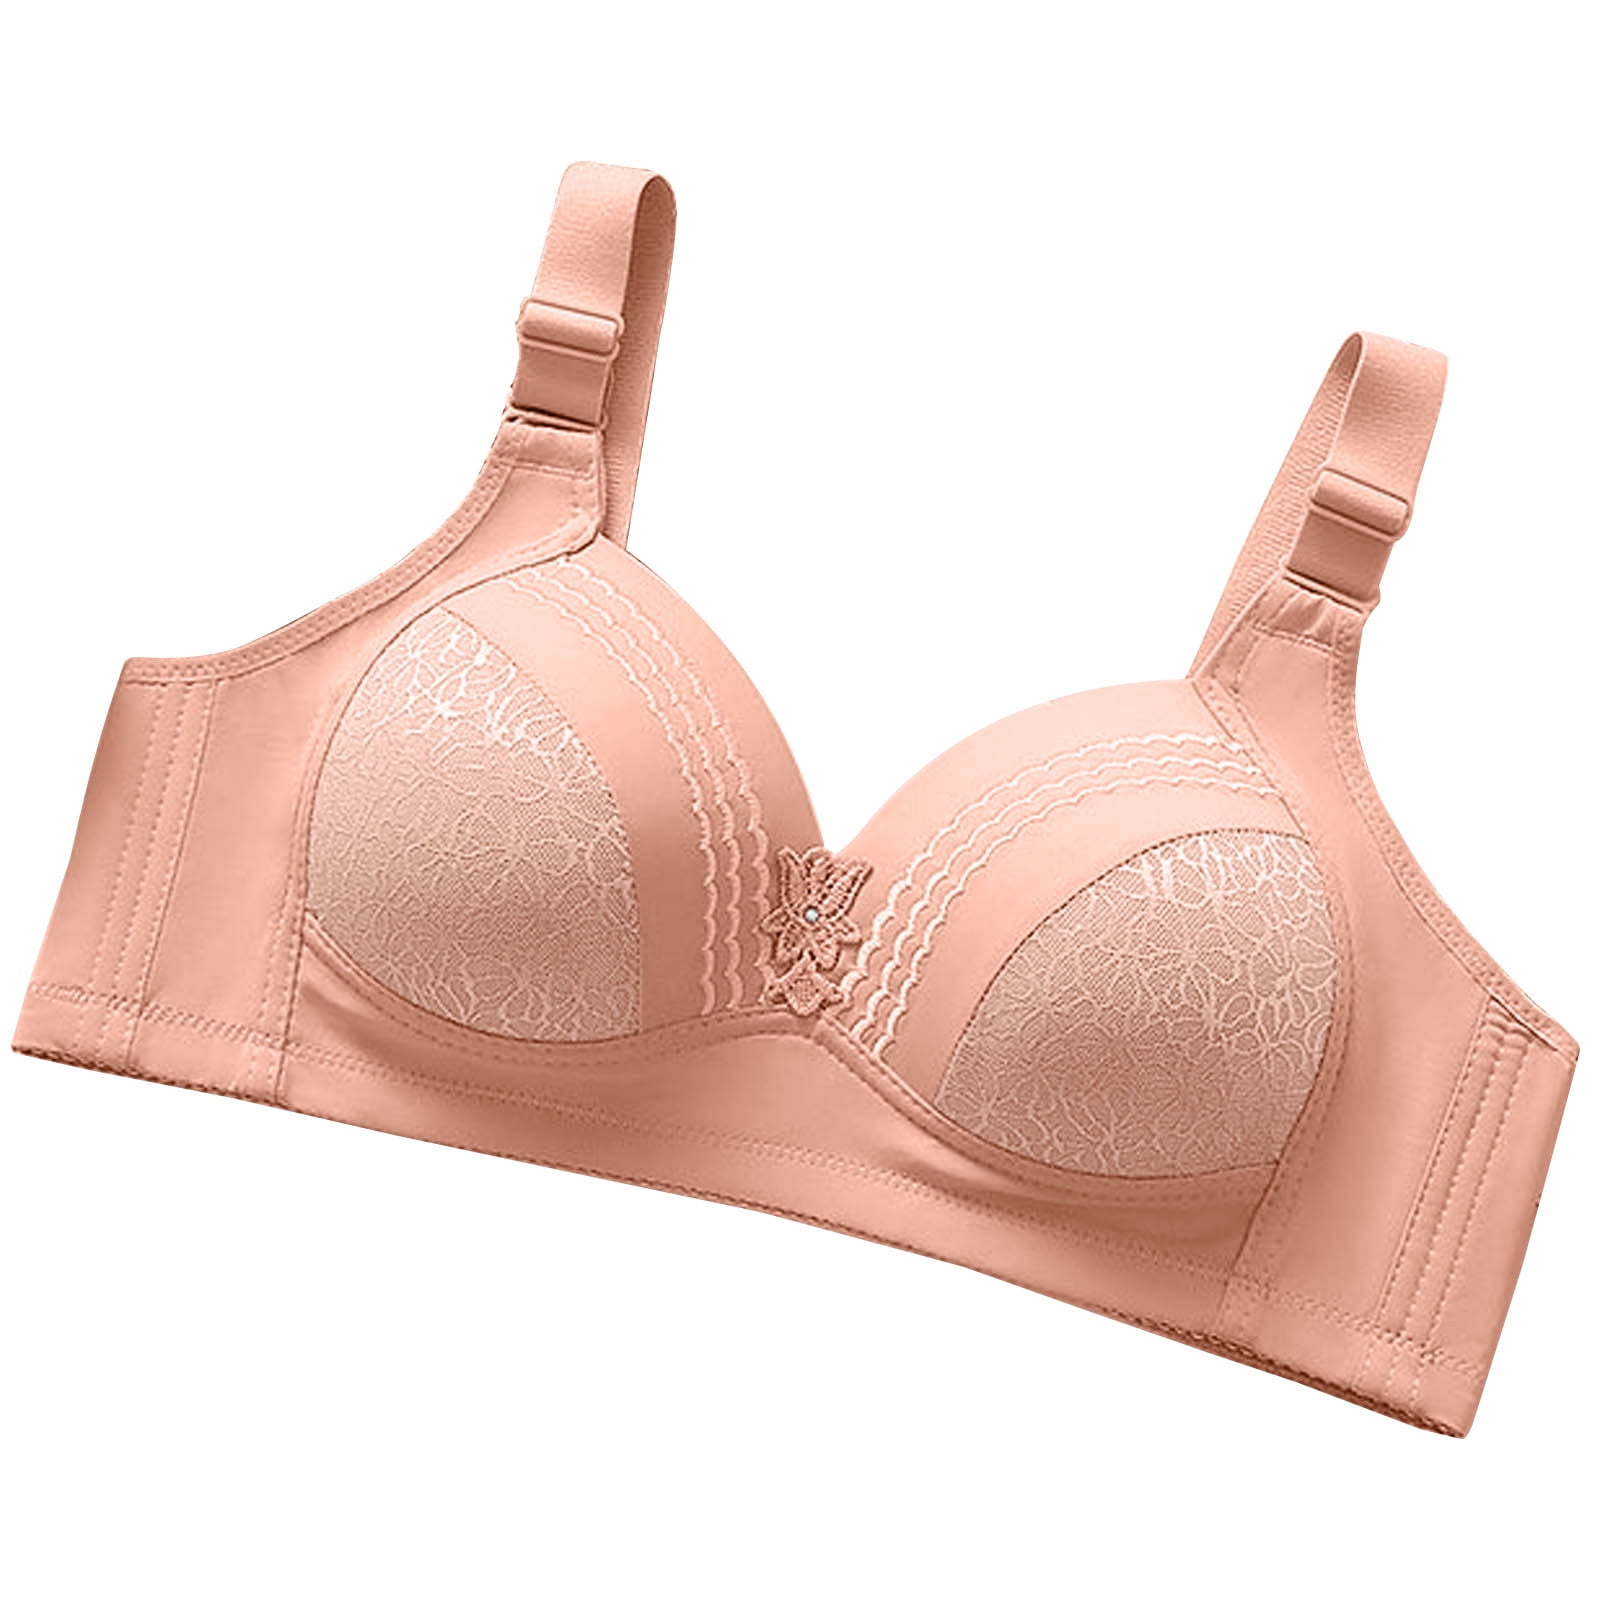 Bras for Women Clearance,AIEOTT Plus Size Push Up Bra,Women Solid  Underwired Sexy Lace Back Double Breasted Lingerie,Extra-Elastic Womens  Bras